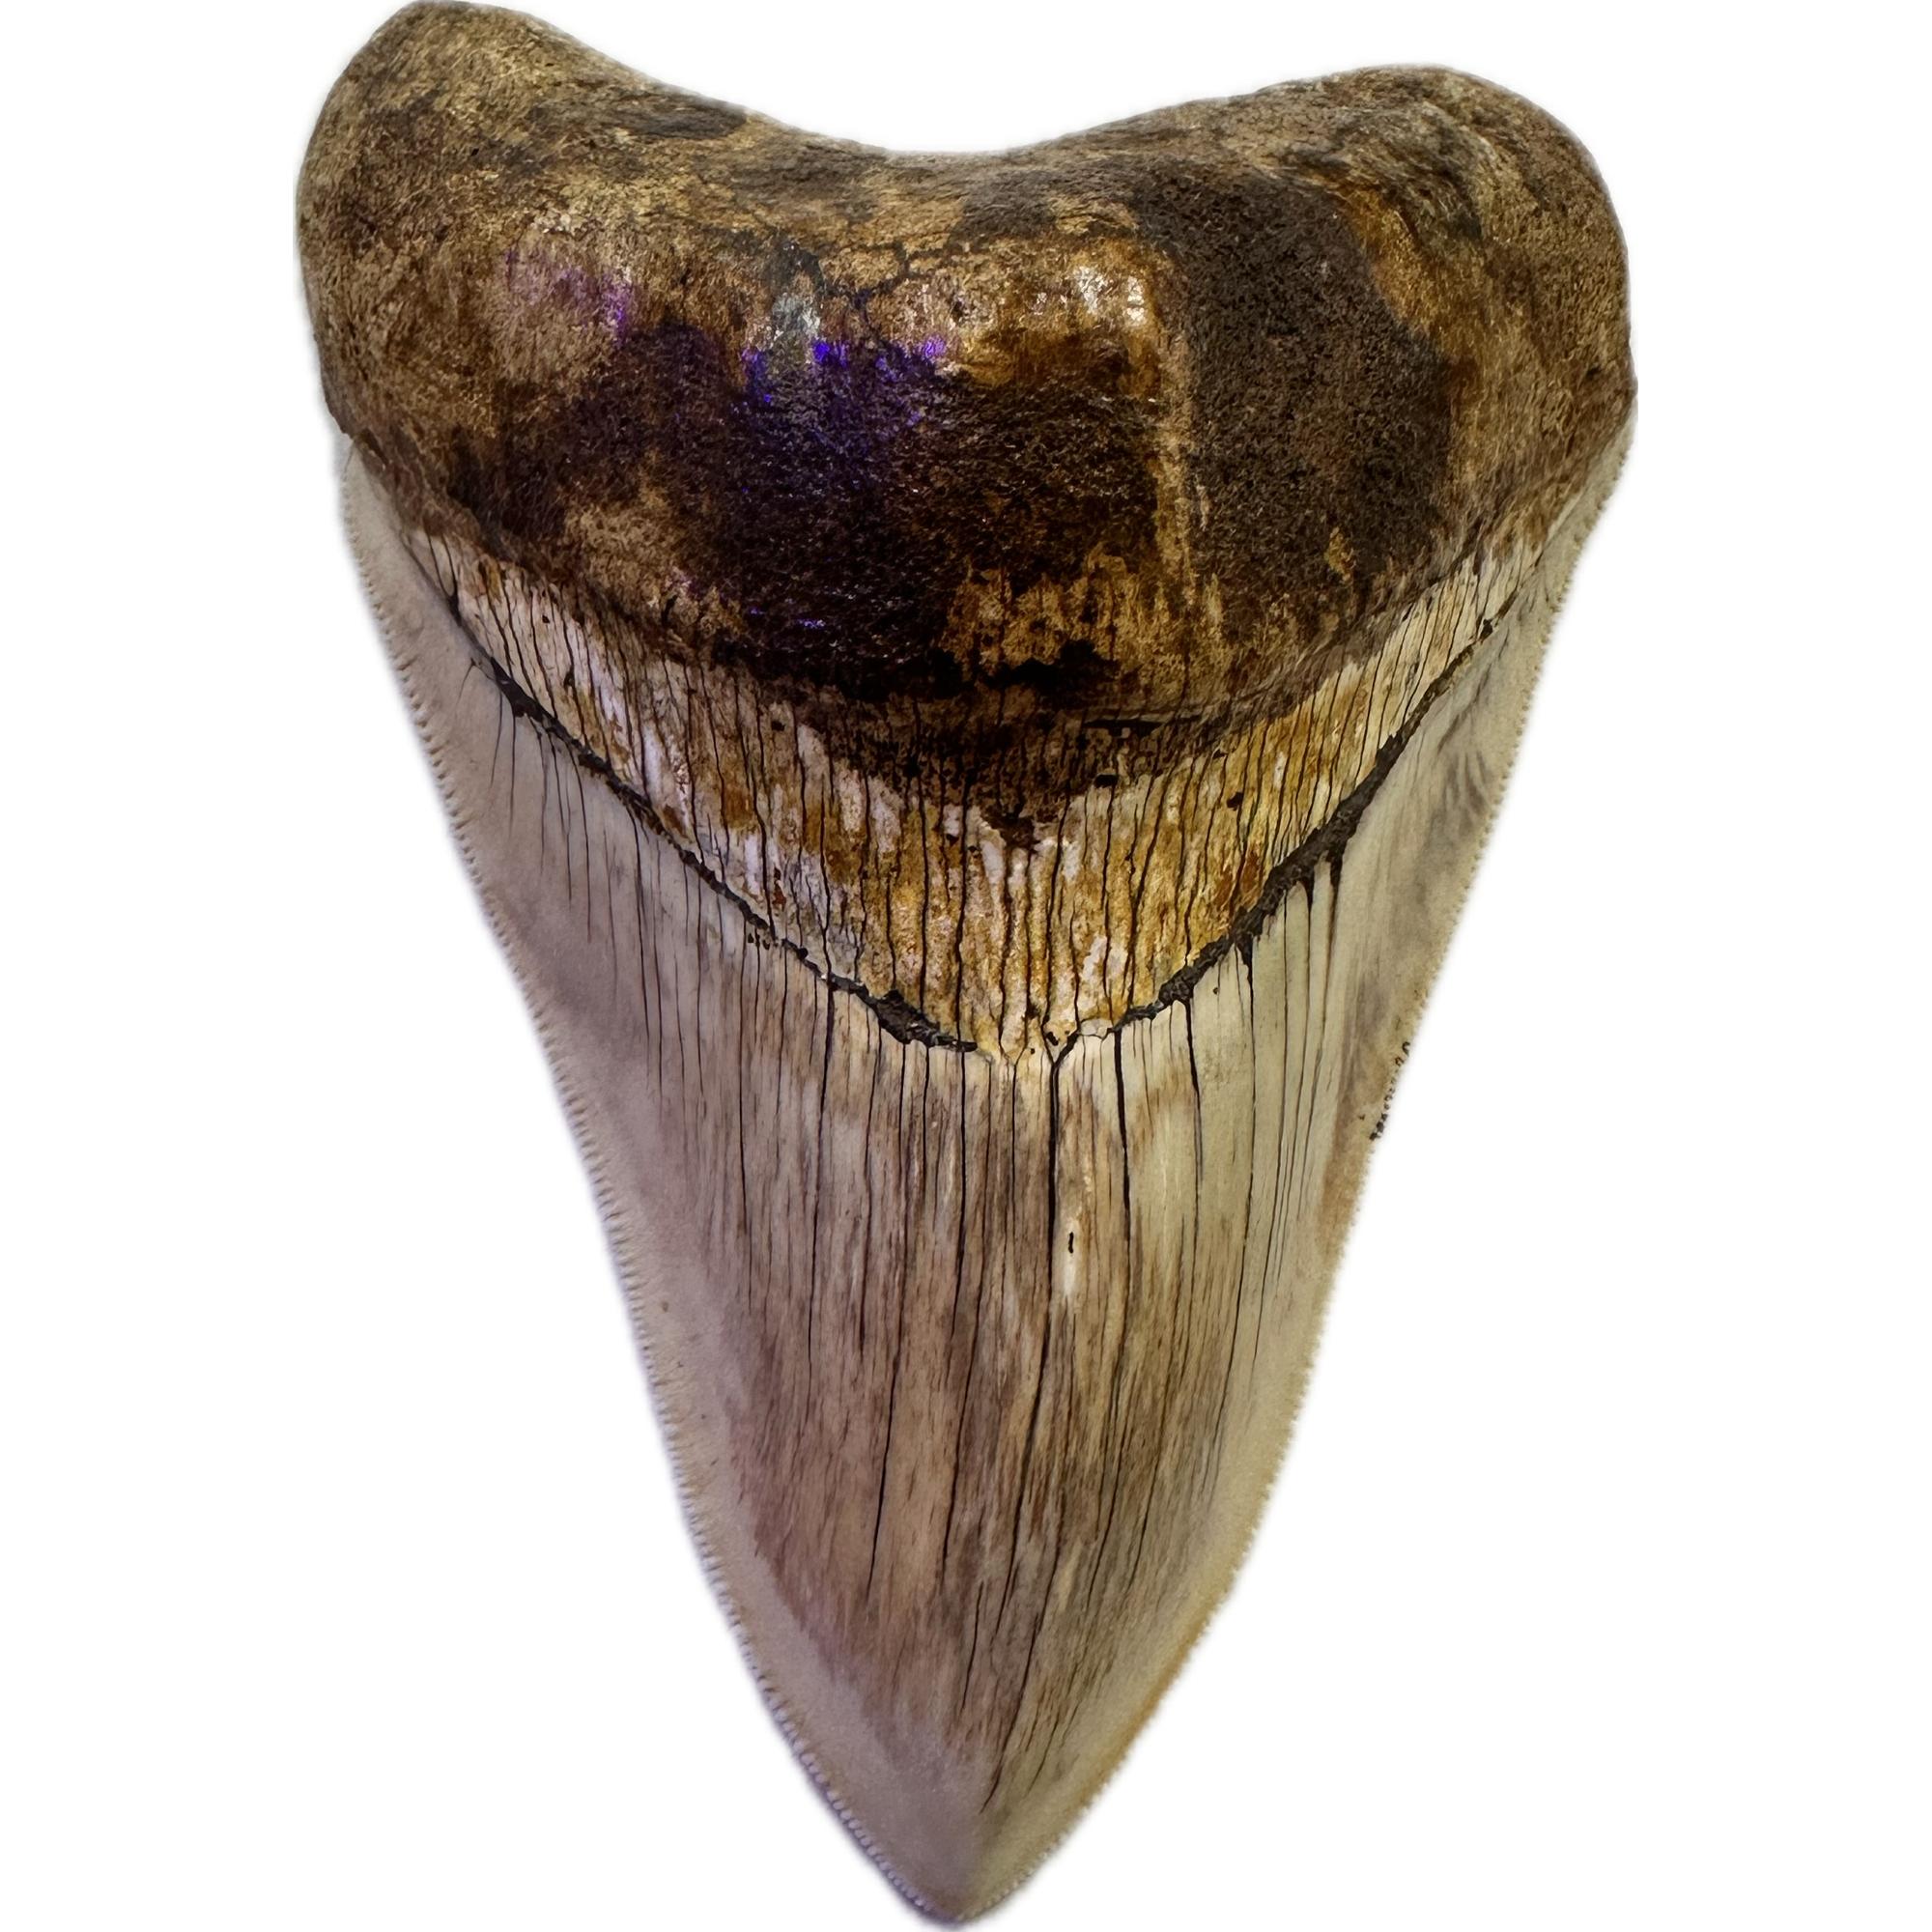 Megalodon shark tooth with full serrations from Indonesia. No repair or enhancements.